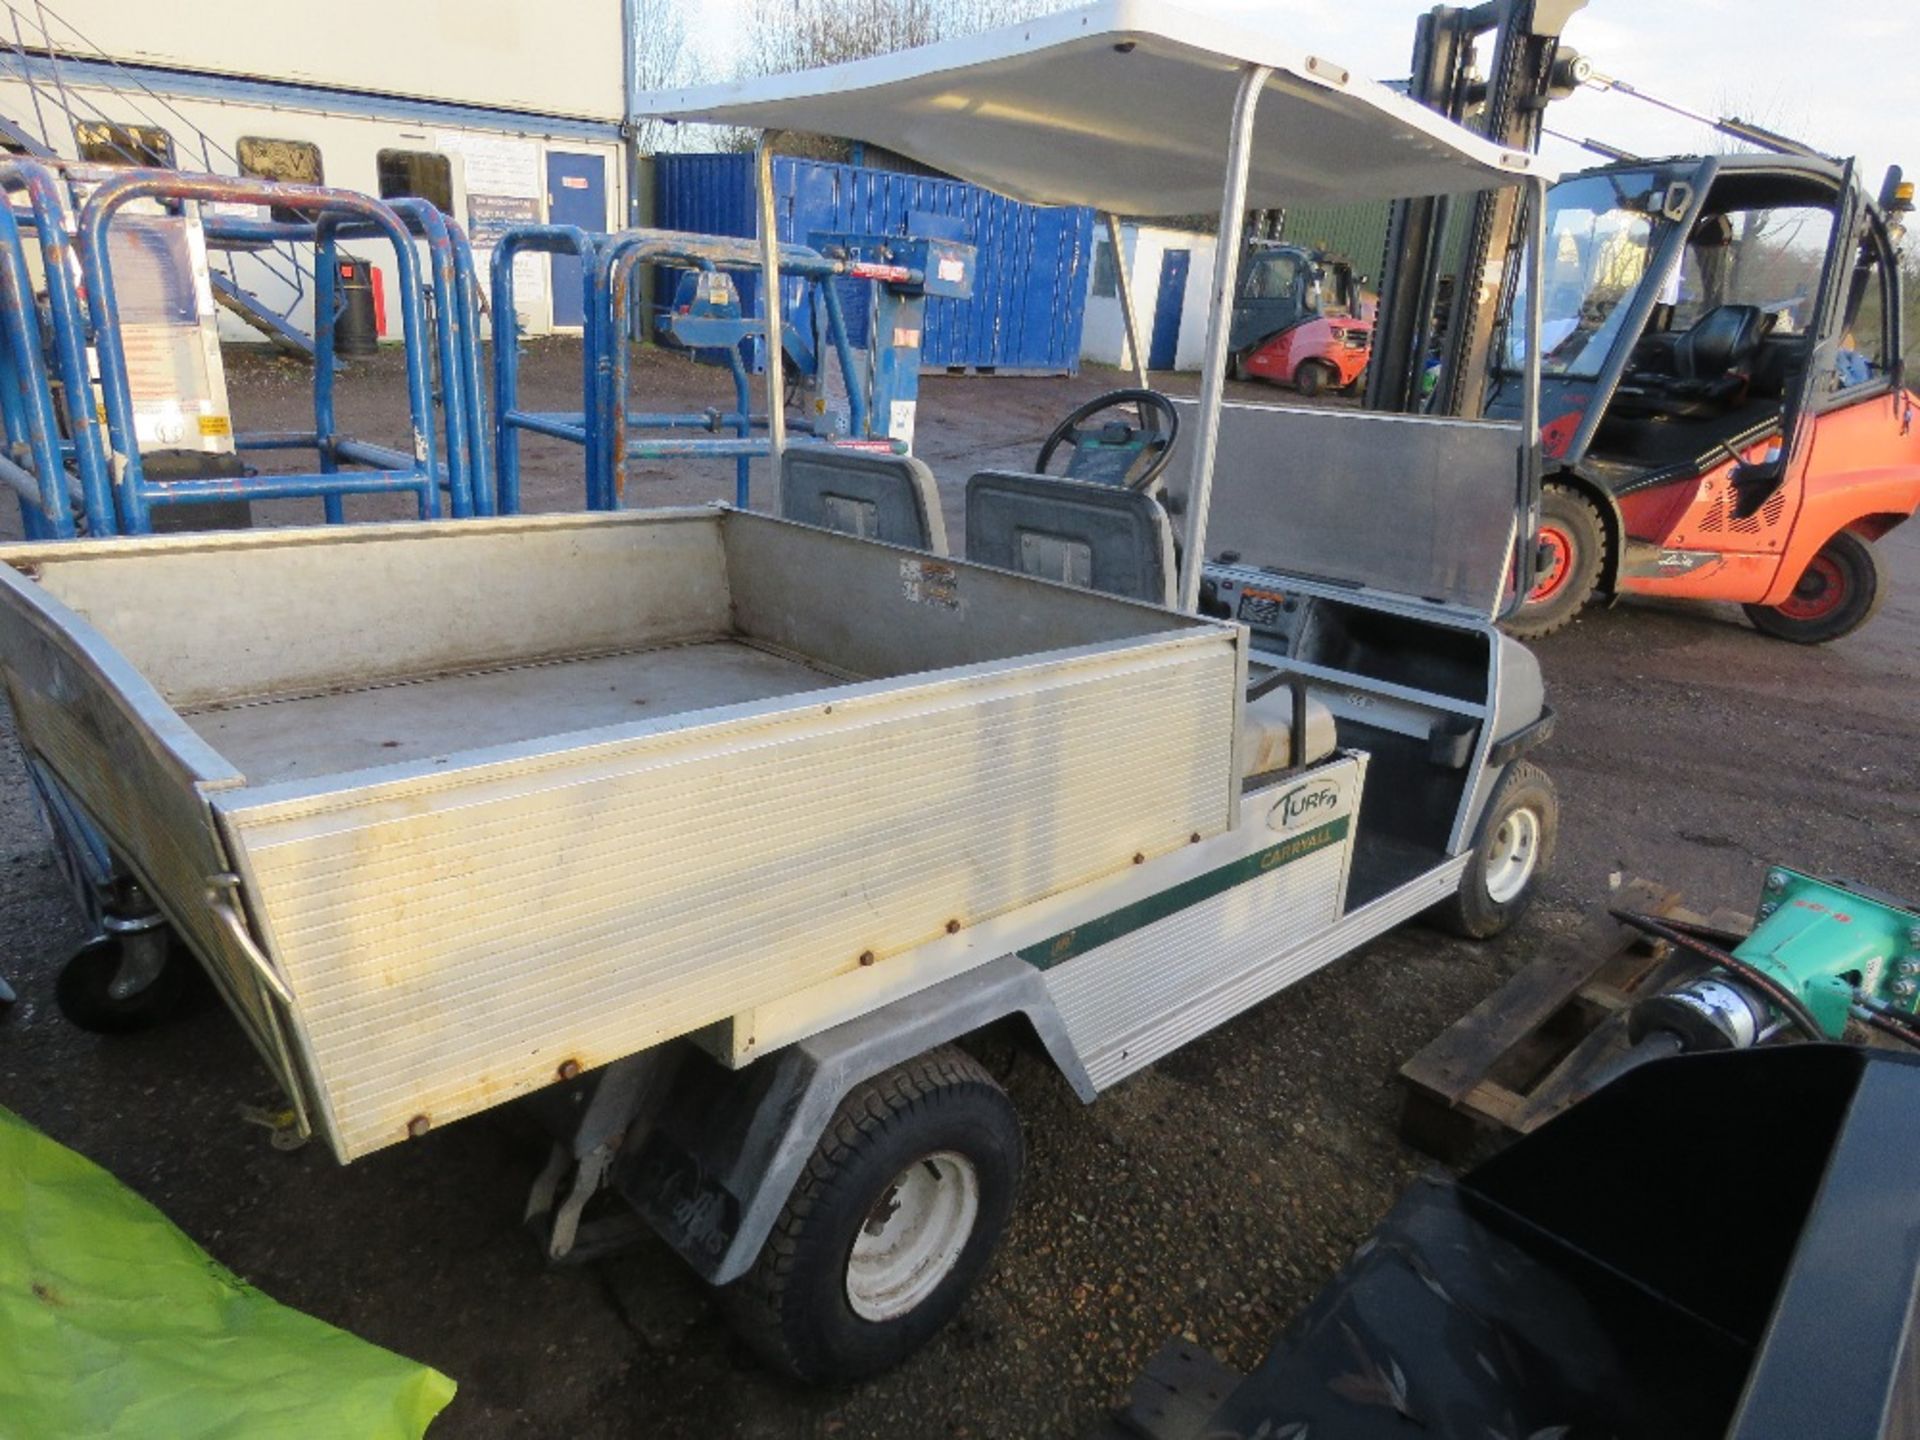 CLUBCAR CARRYALL TURF 2 PETROL ENGINED UTILITY TRUCK. WHEN TESTED WAS SEEN TO DRIVE, STEER AND BRAKE - Image 3 of 11